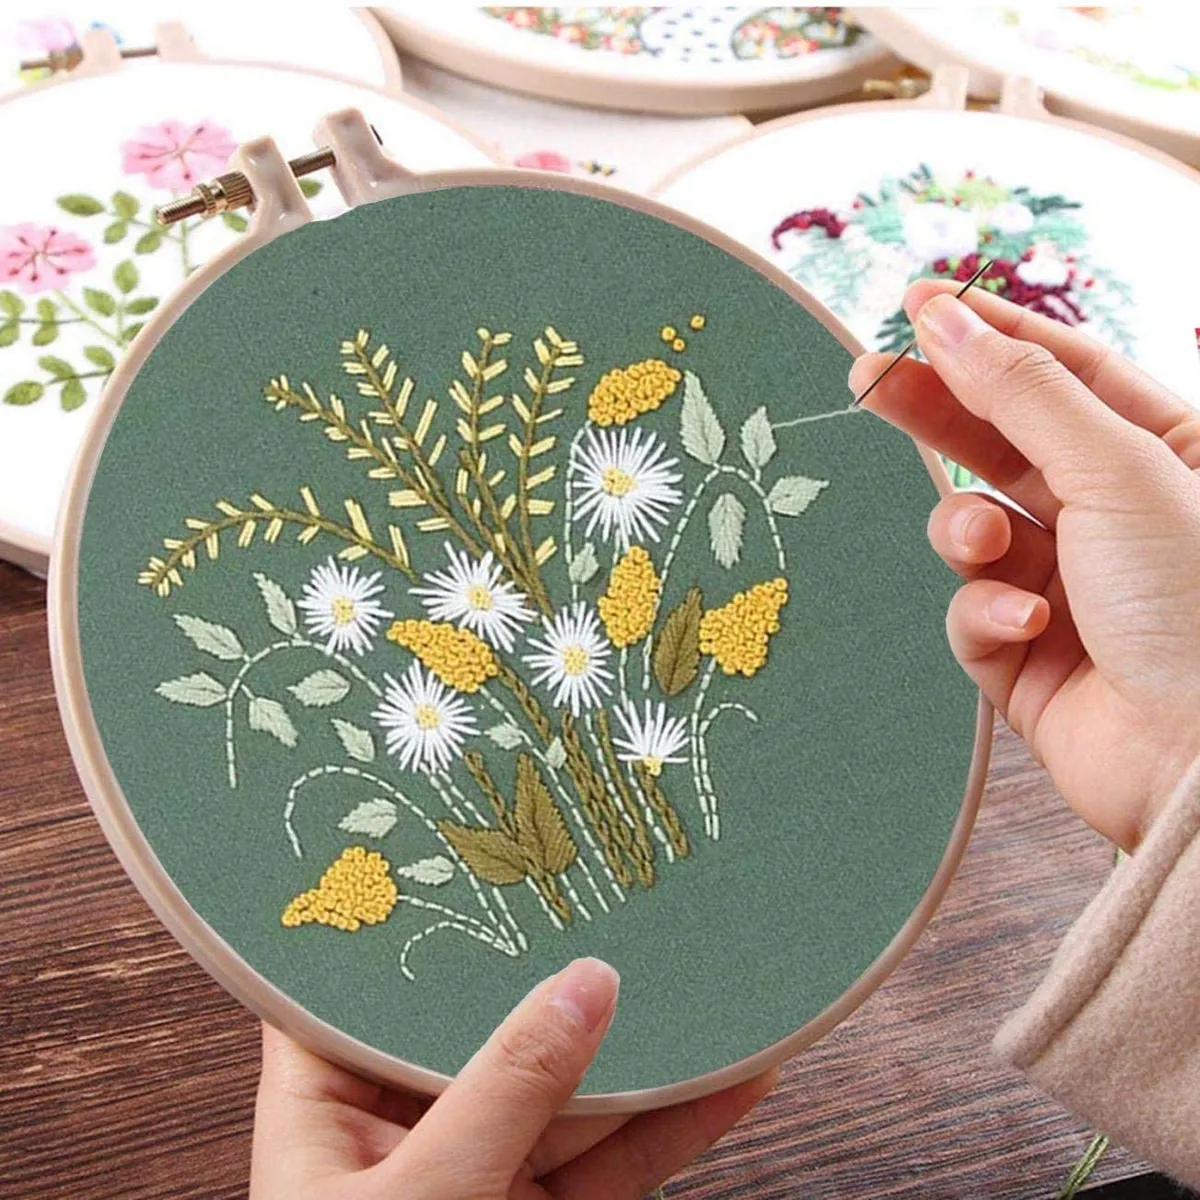 craft kits for adults embroidery daisy